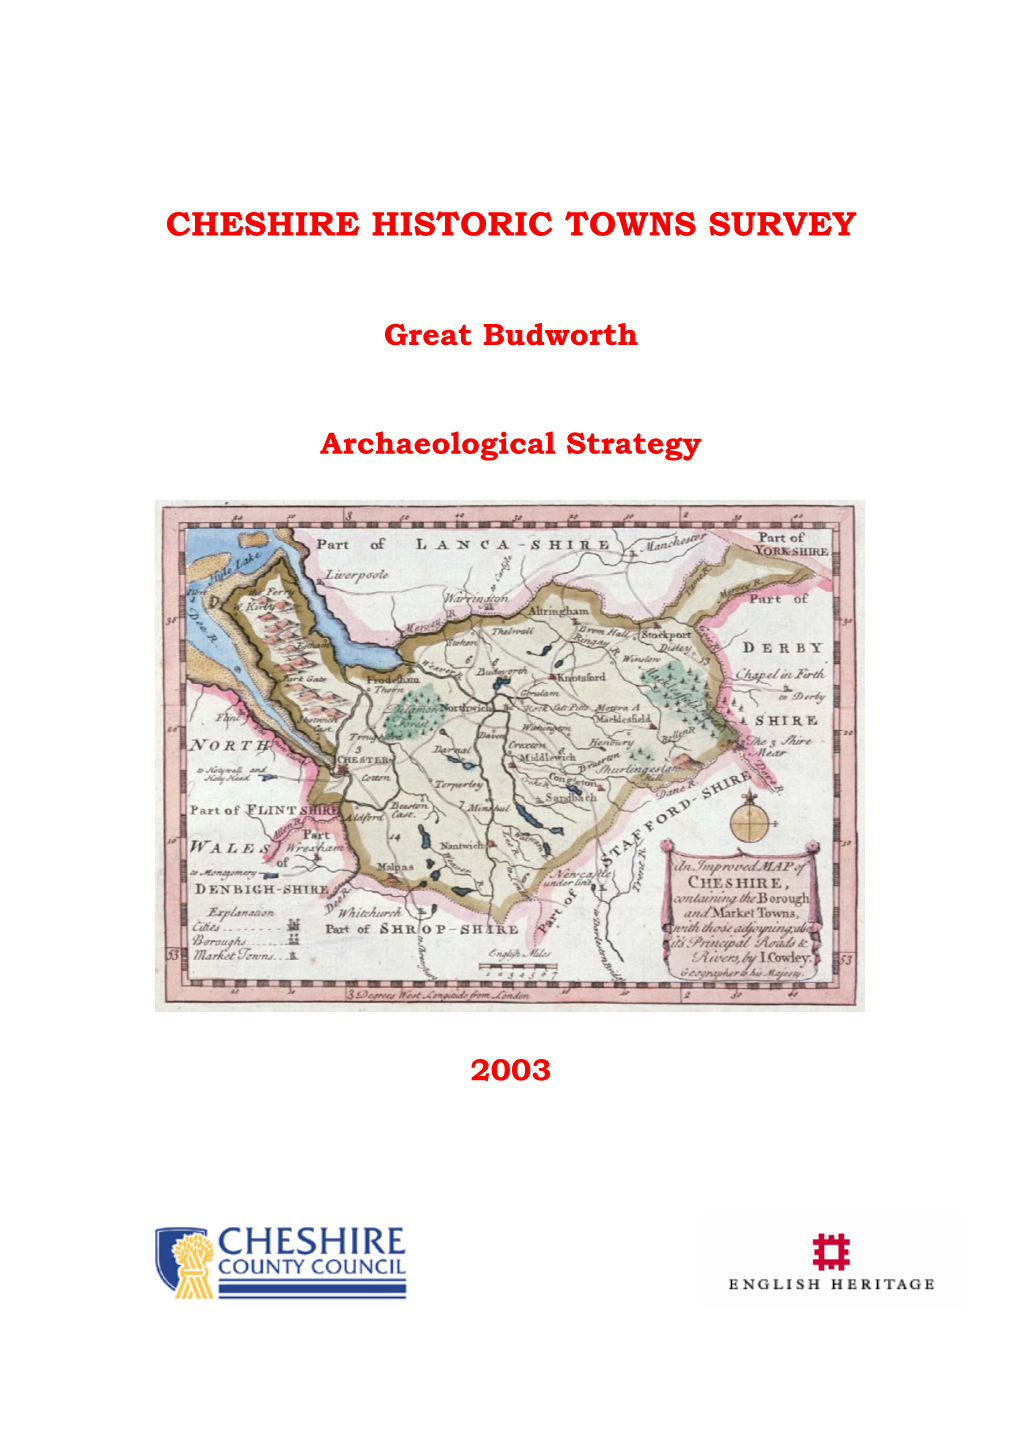 Great Budworth Archaeological Strategy